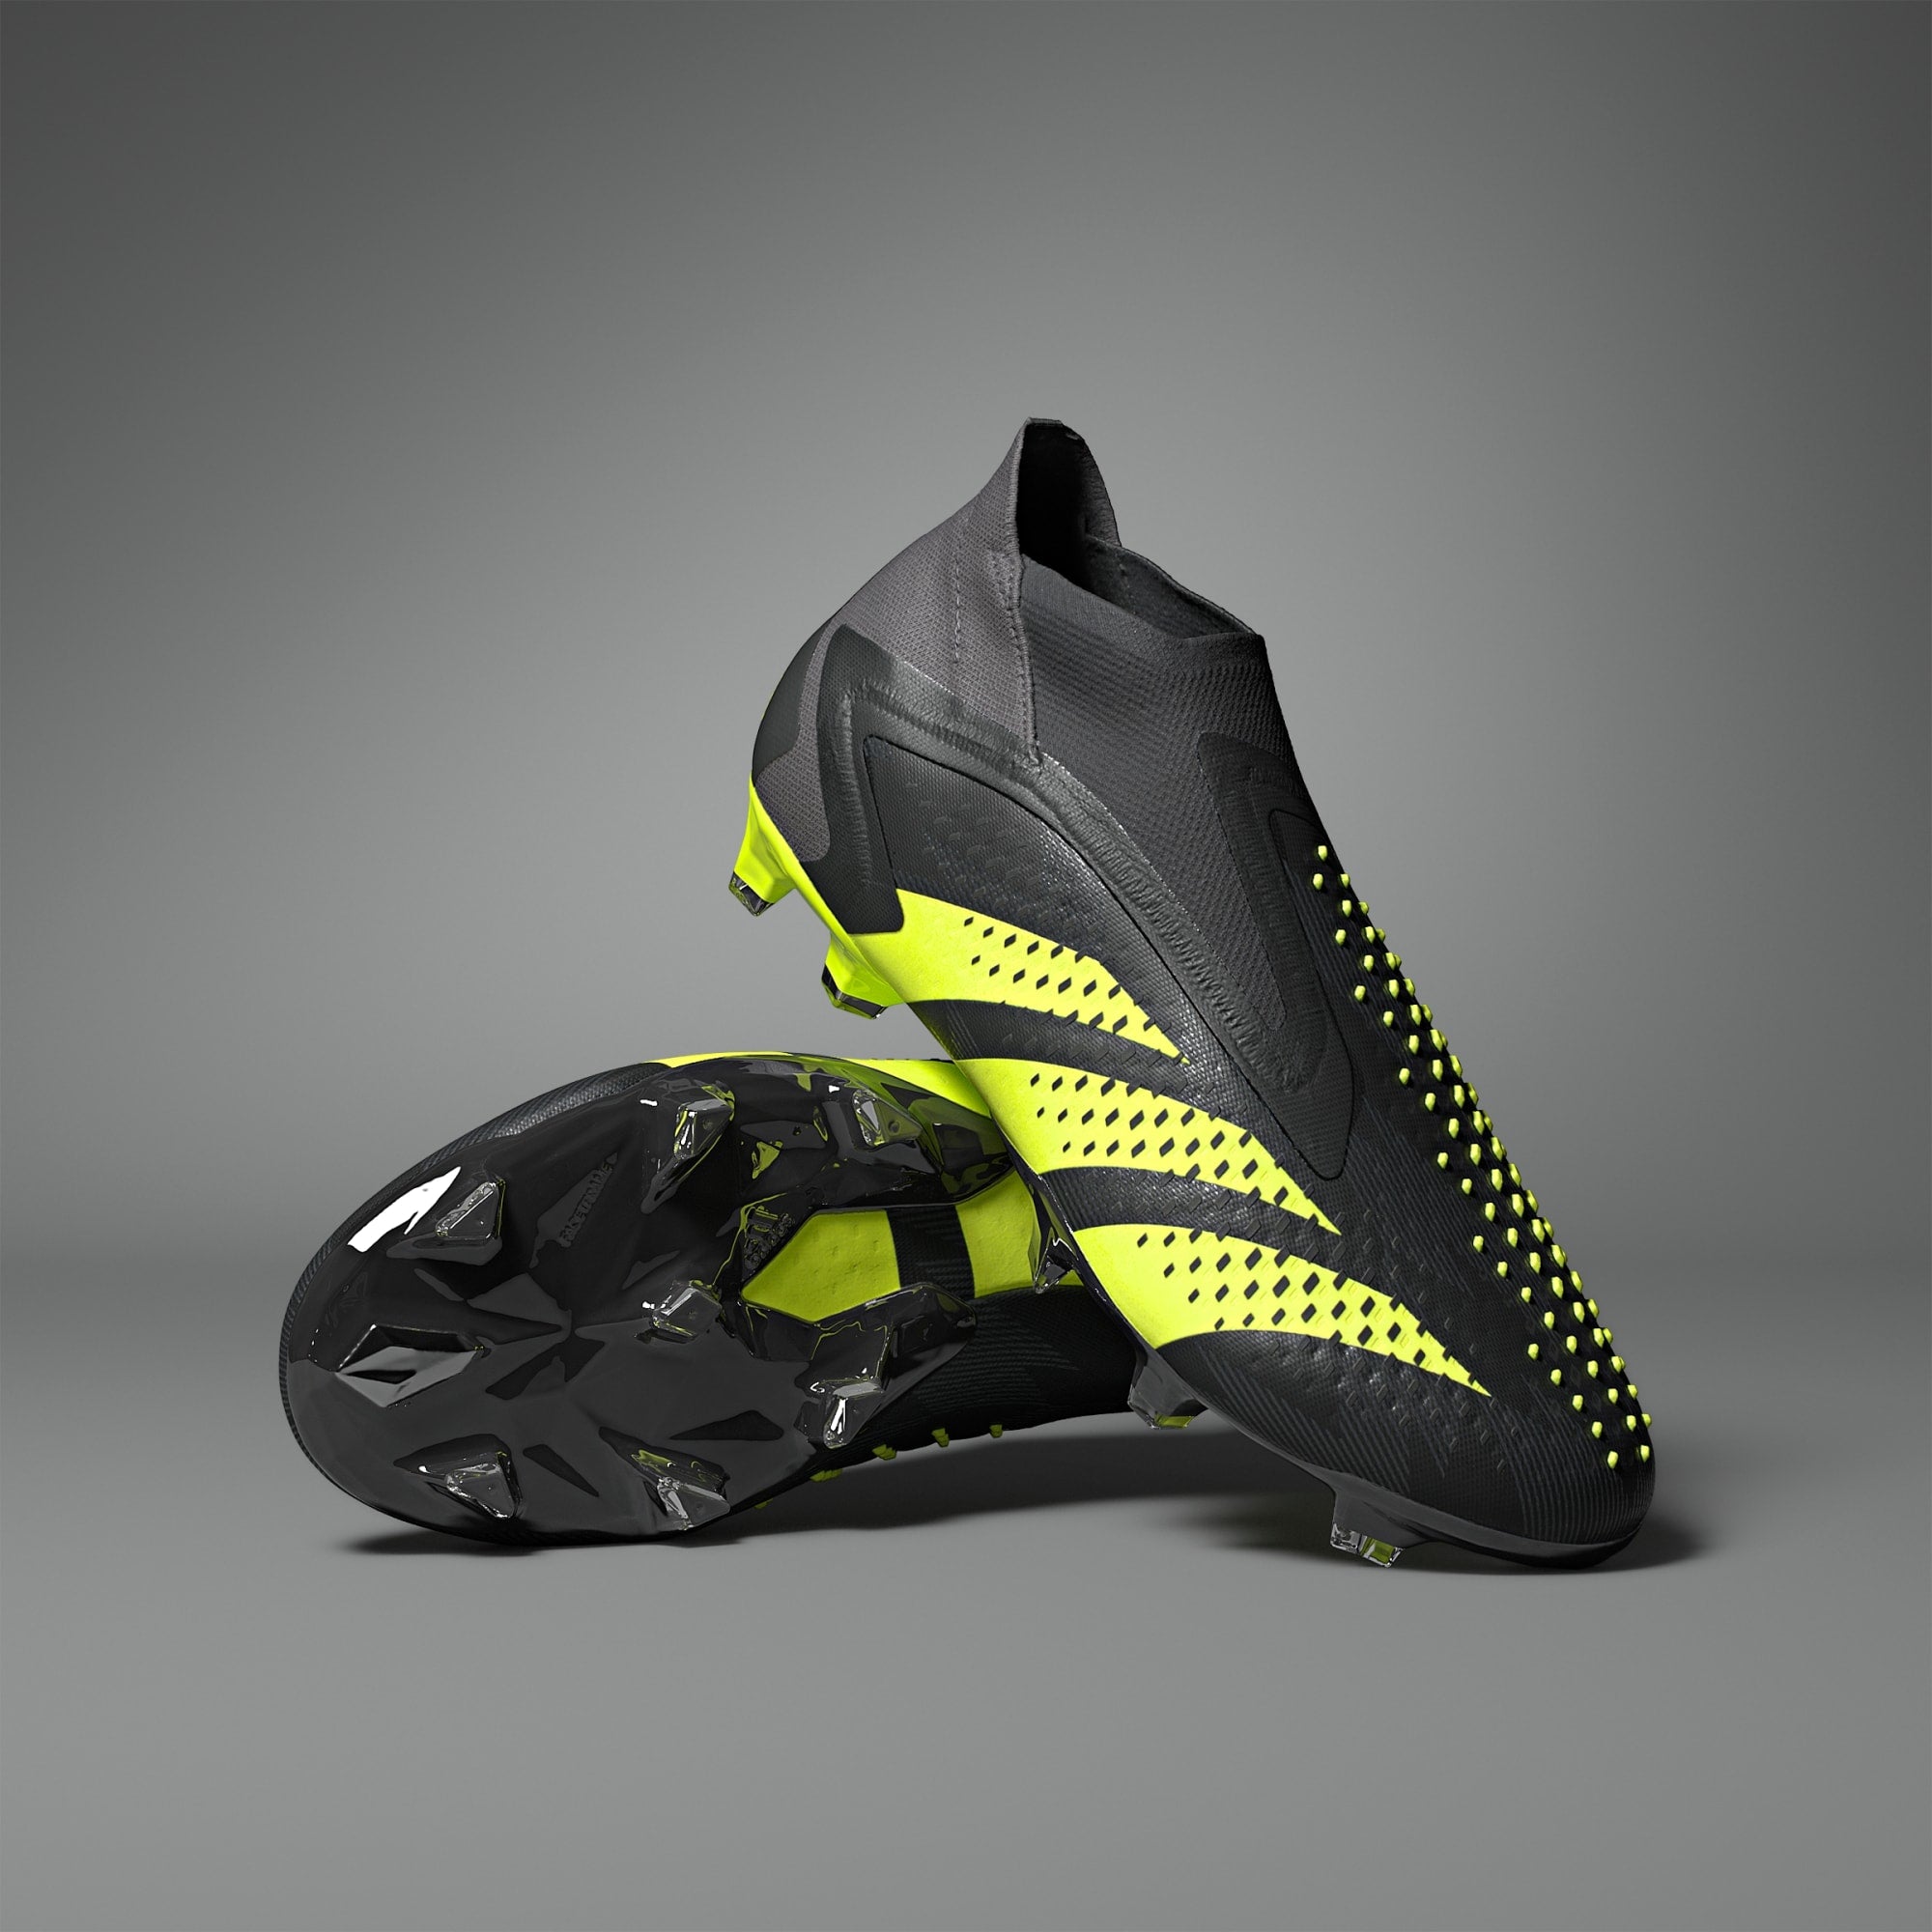 adidas PREDATOR ACCURACY INJECTION+ FIRM GROUND SOCCER CLEATS